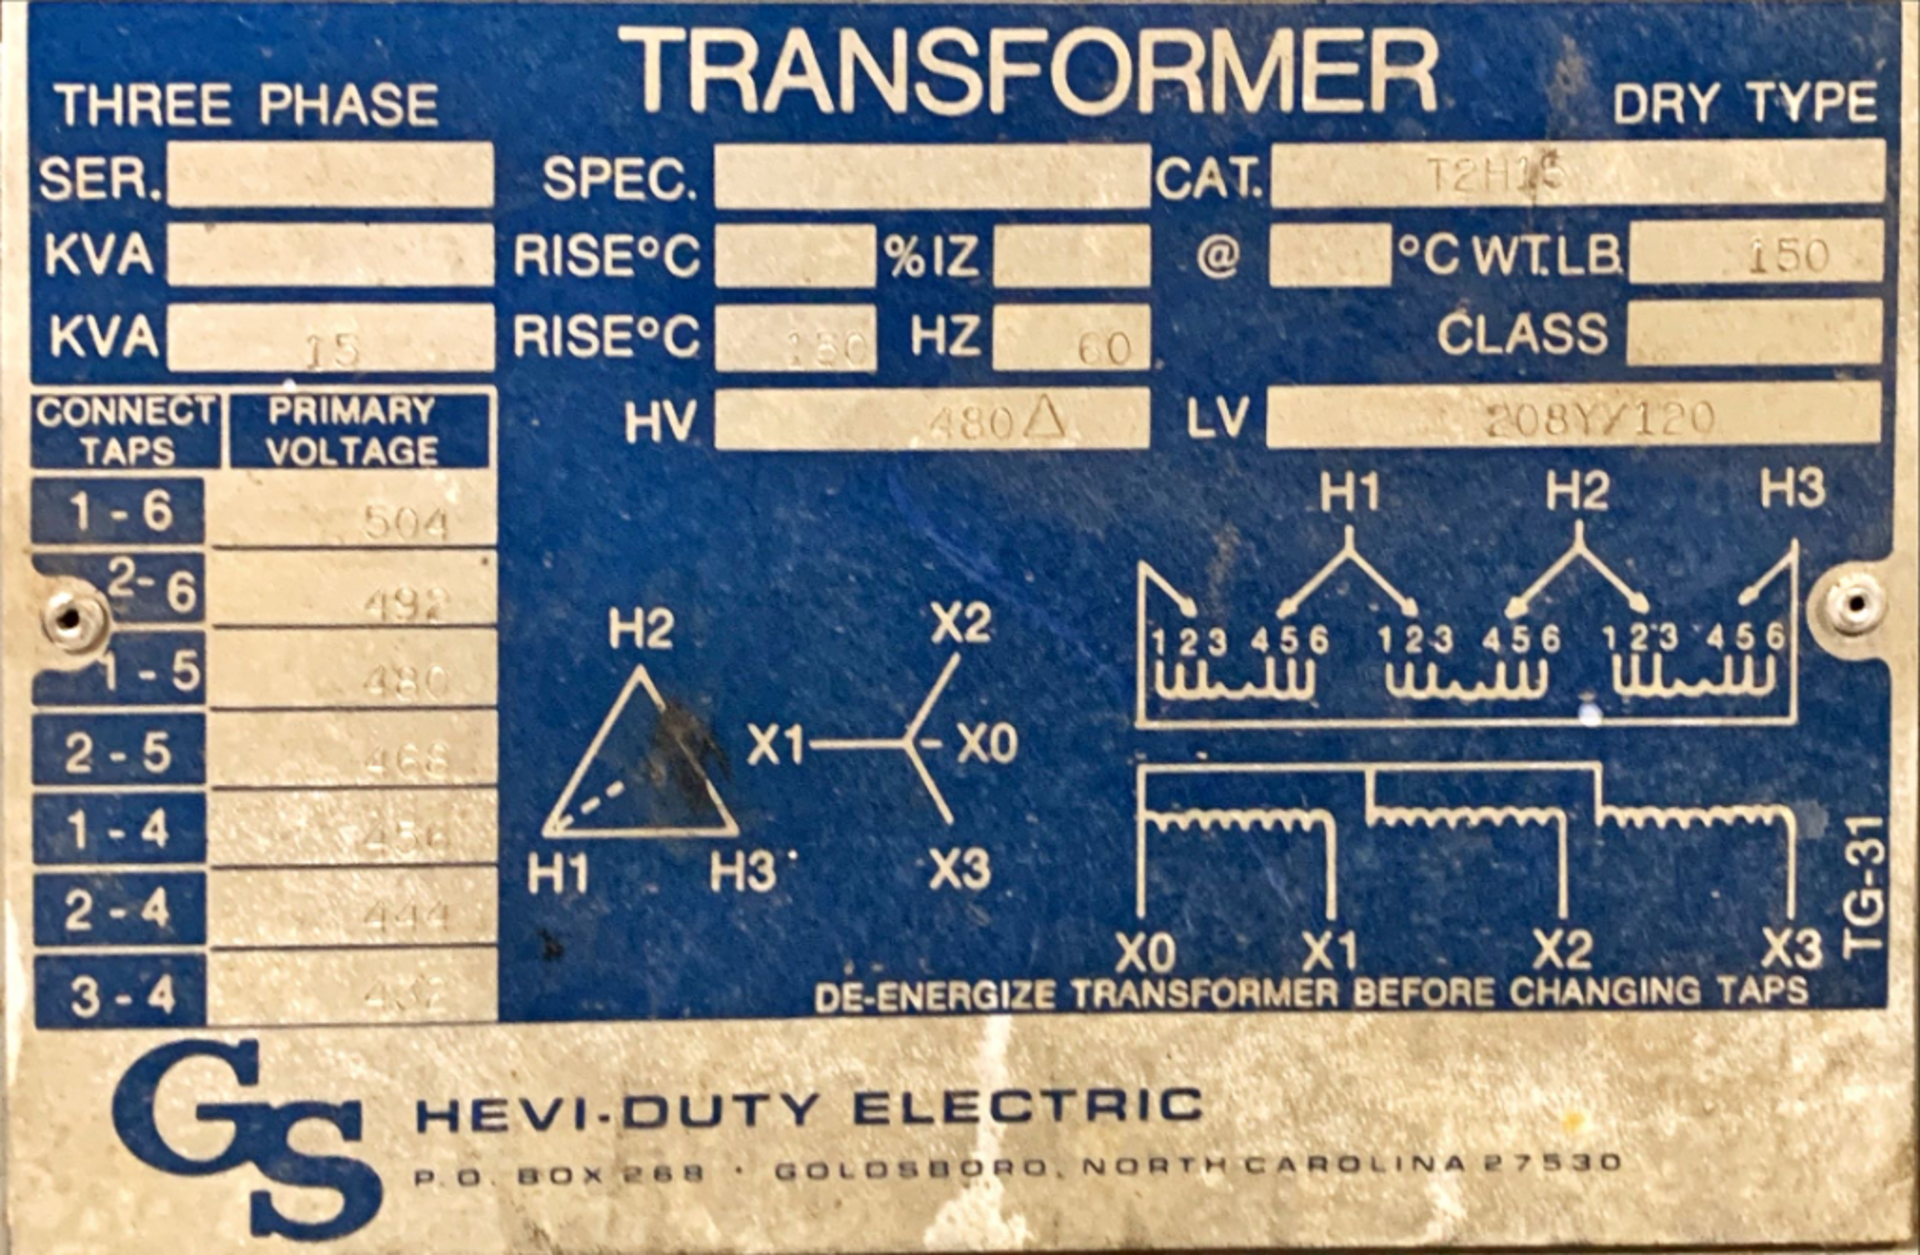 GS Dry Type Transformer - Image 3 of 3